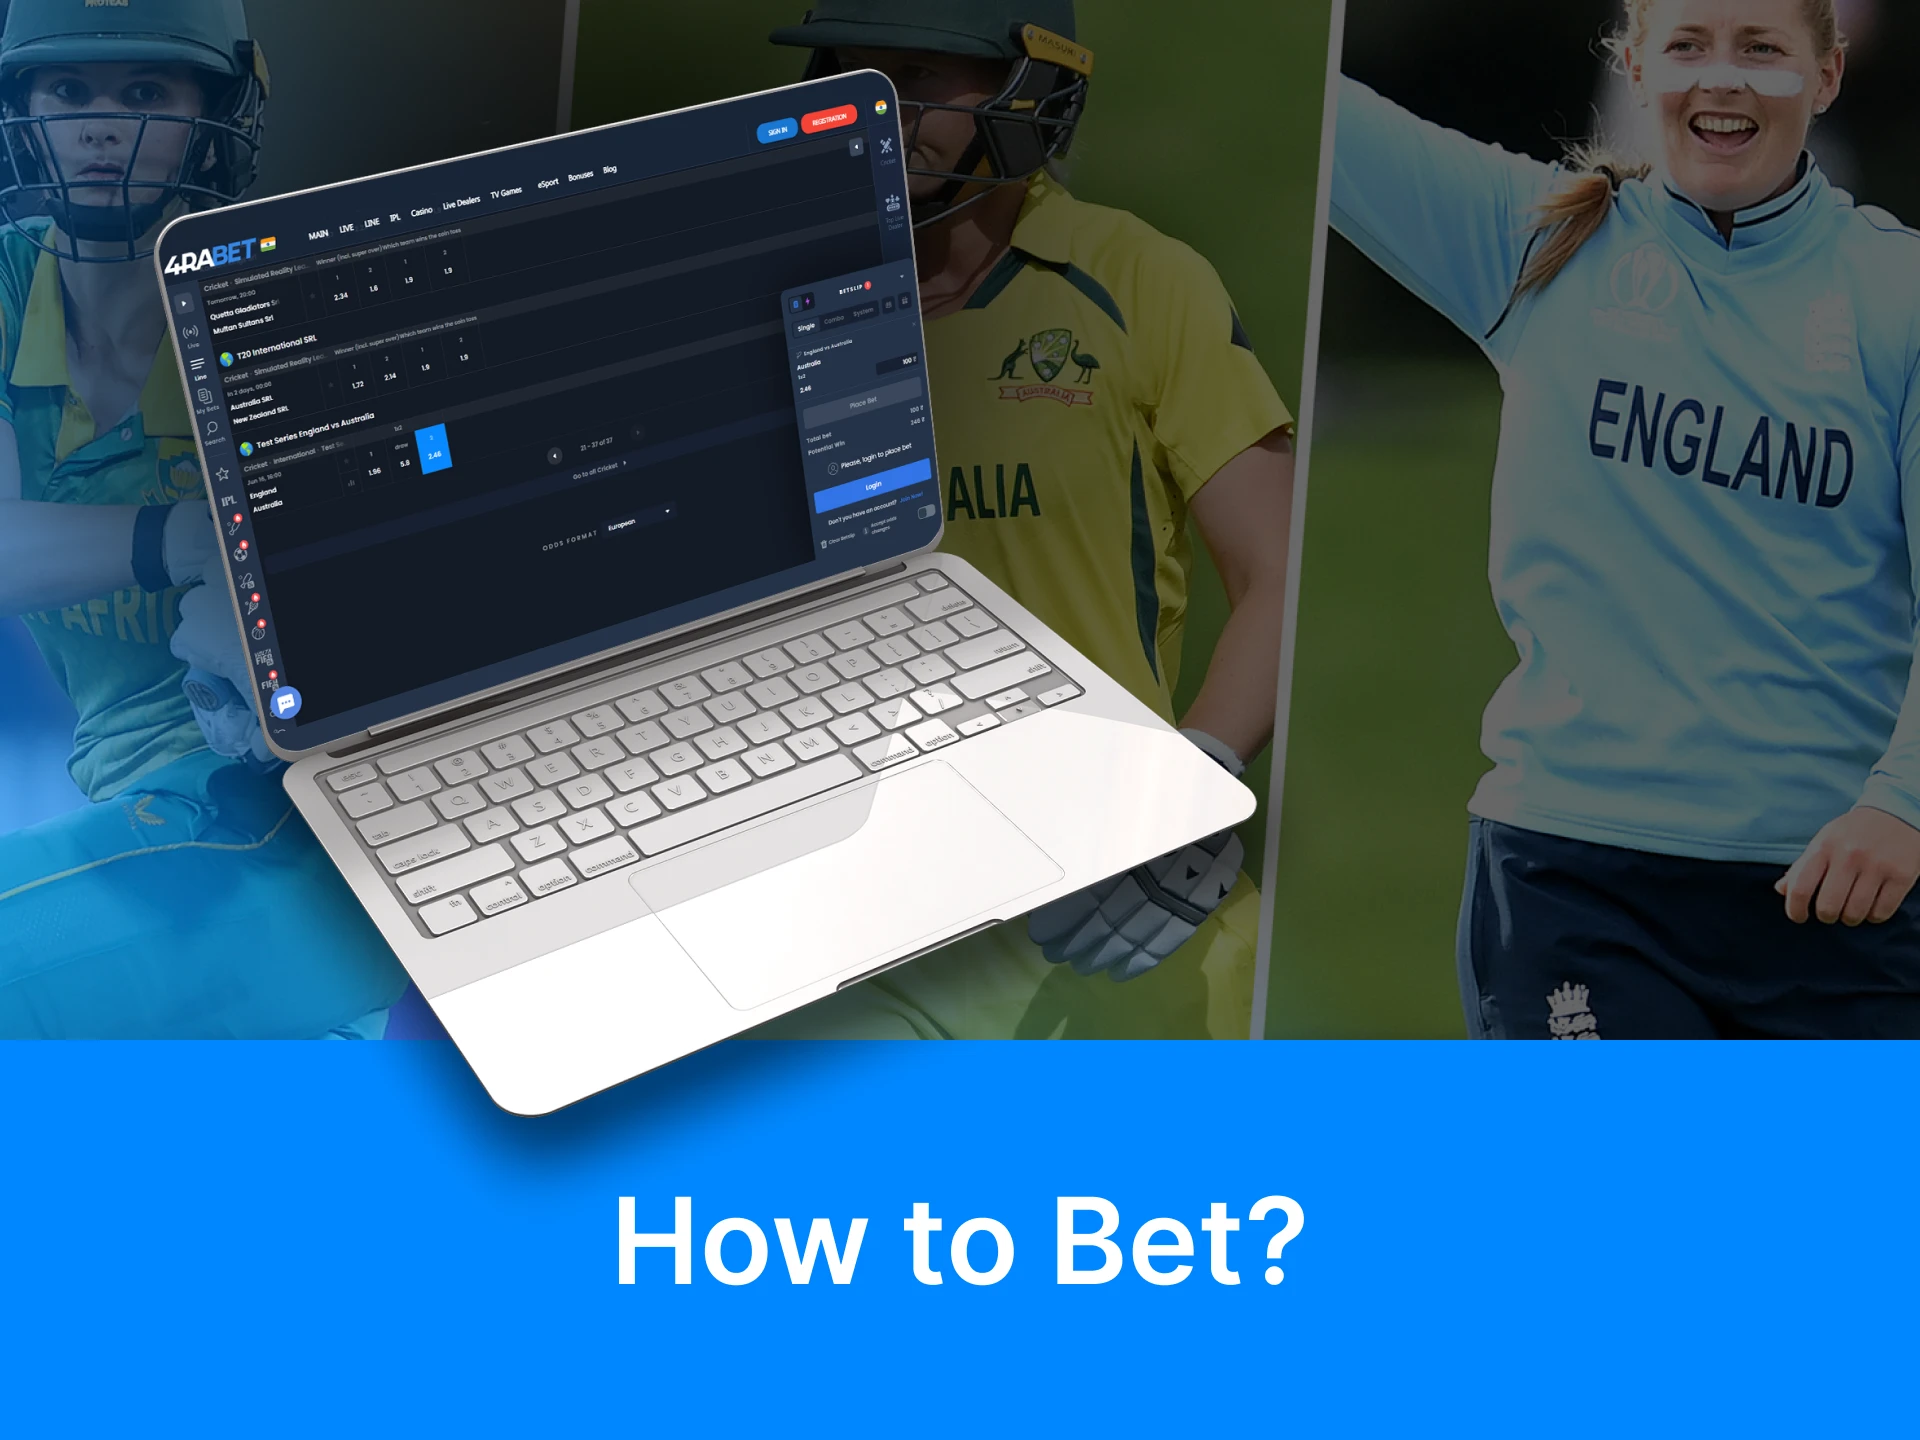 Choose a betting site, make a prediction and place a bet on any Women's Ashes event.